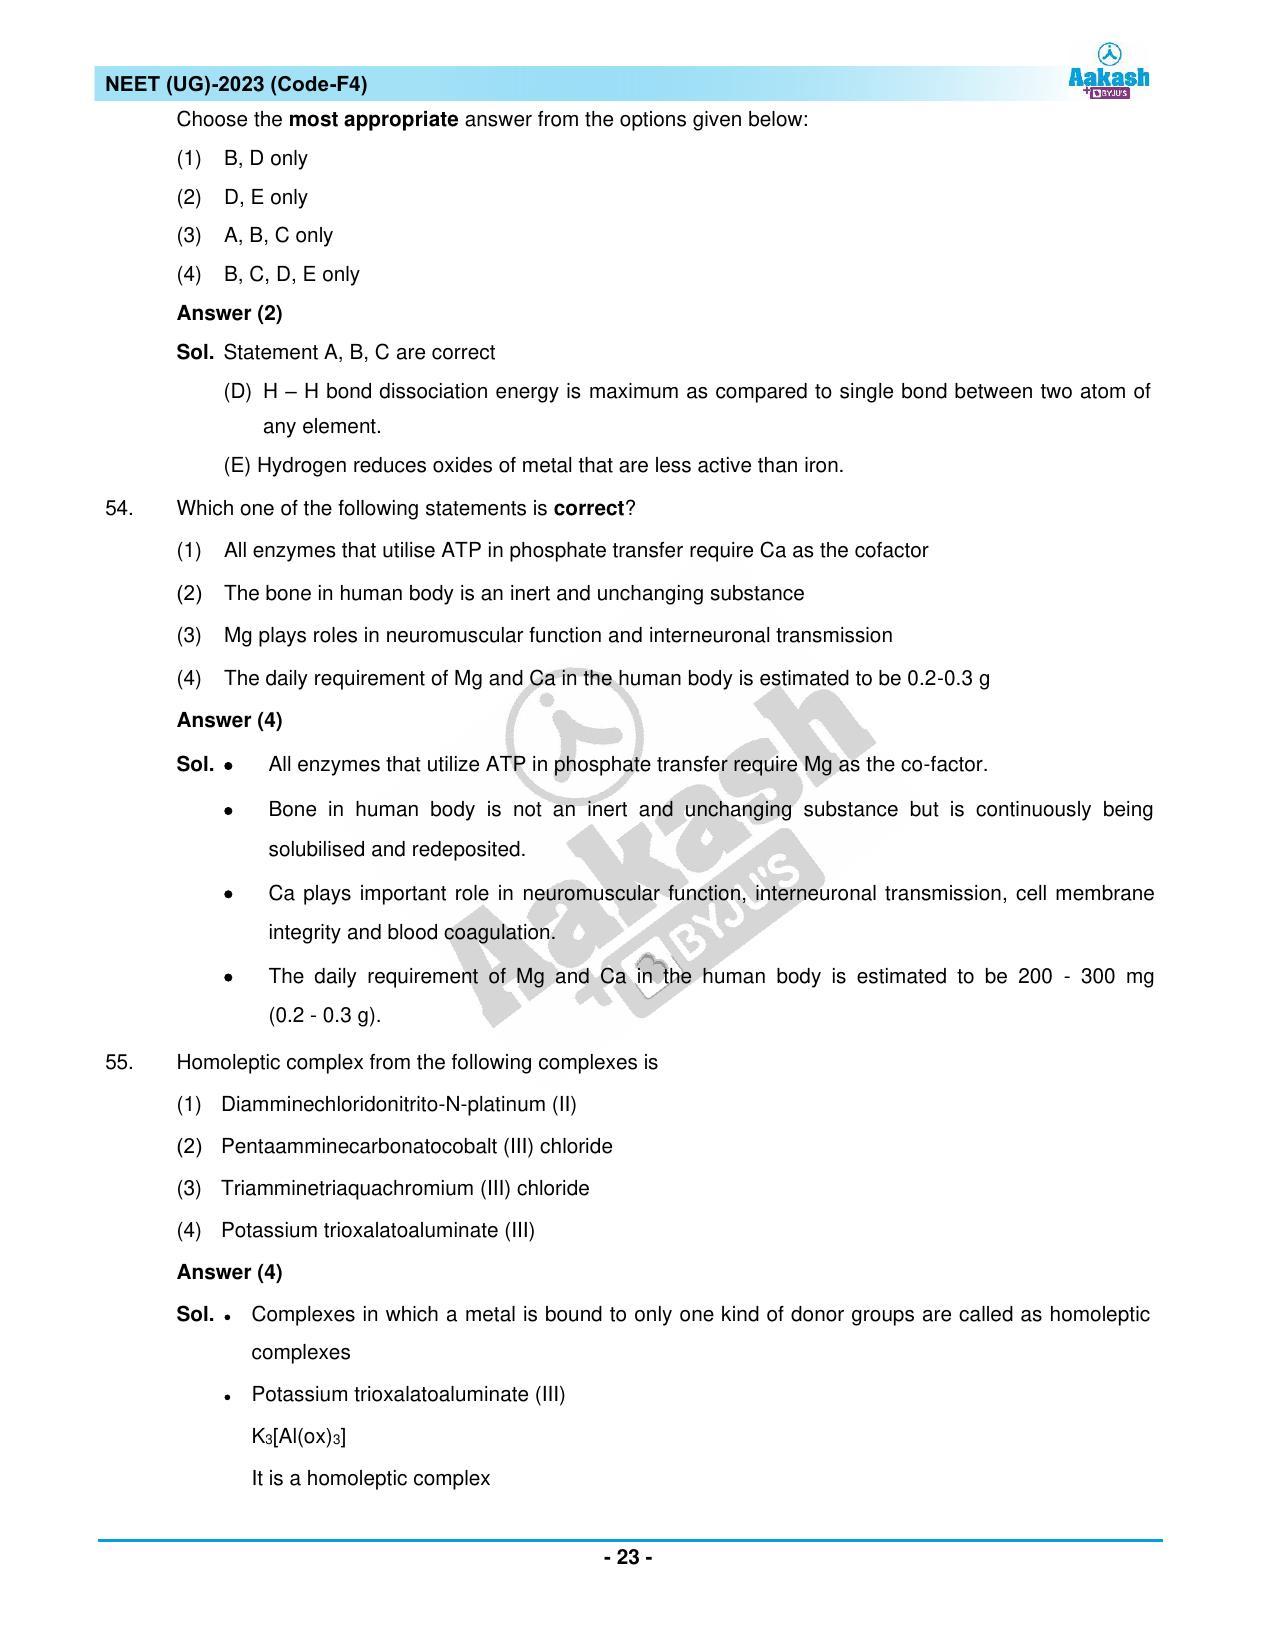 NEET 2023 Question Paper F4 - Page 23